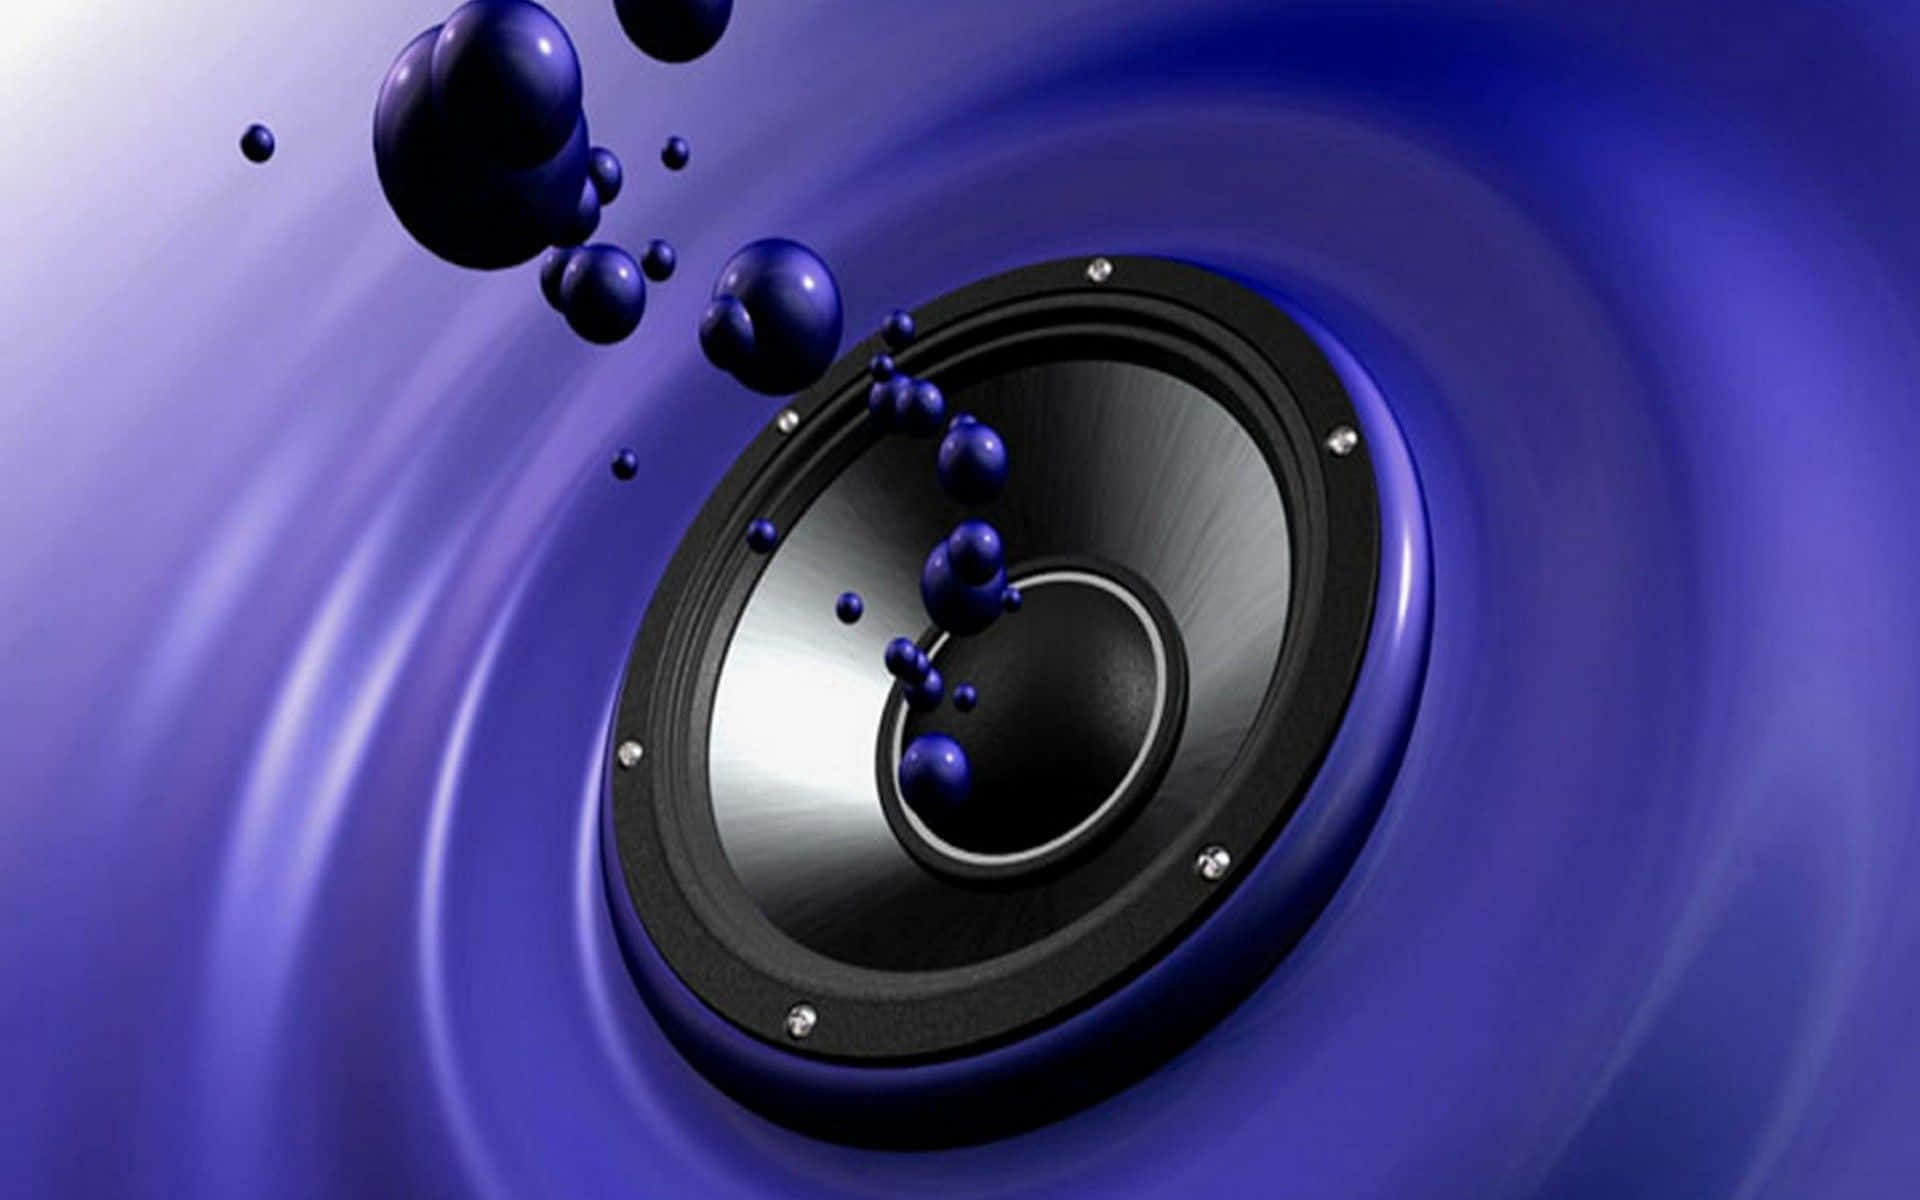 Speaker Submerged With Blue Waves And Bubbles Illustration Wallpaper